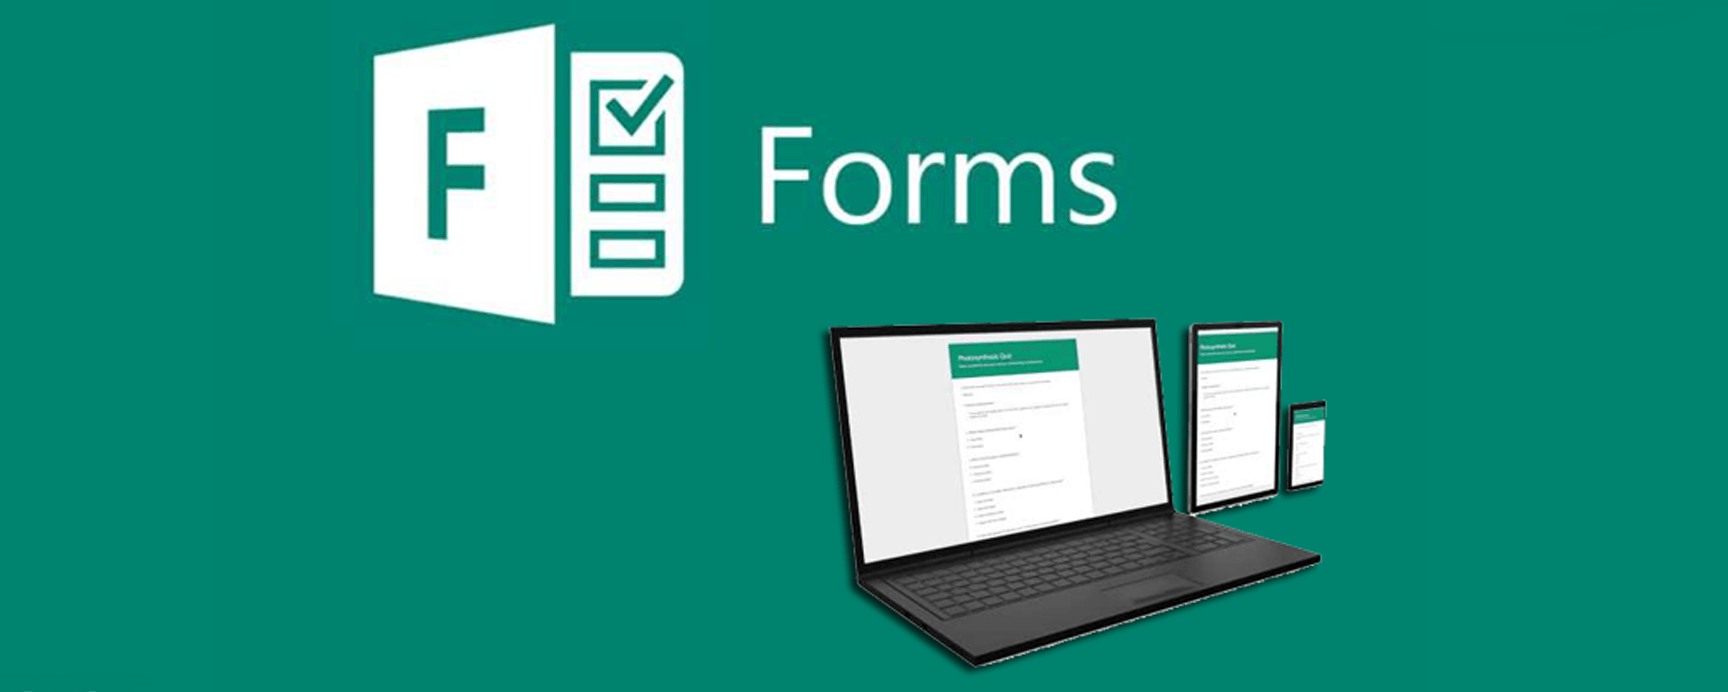 Microsoft Forms Logo - GETTING MORE FROM OFFICE 365